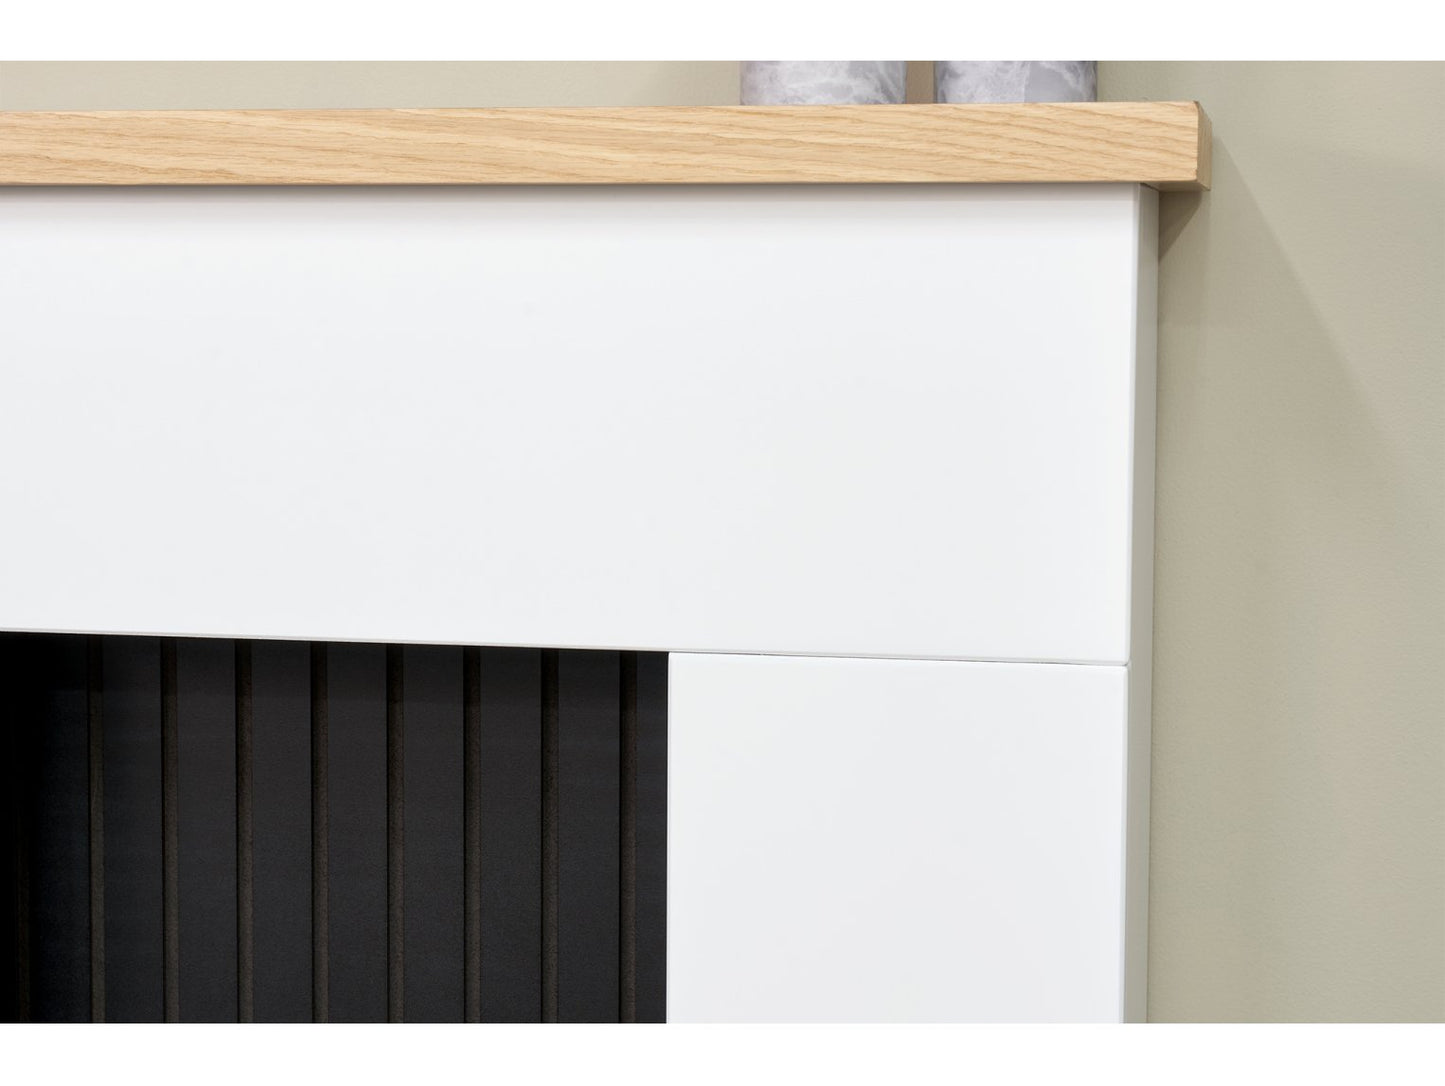 Adam Innsbruck Stove Fireplace Pure White + Woodhouse Electric Stove White, 48"